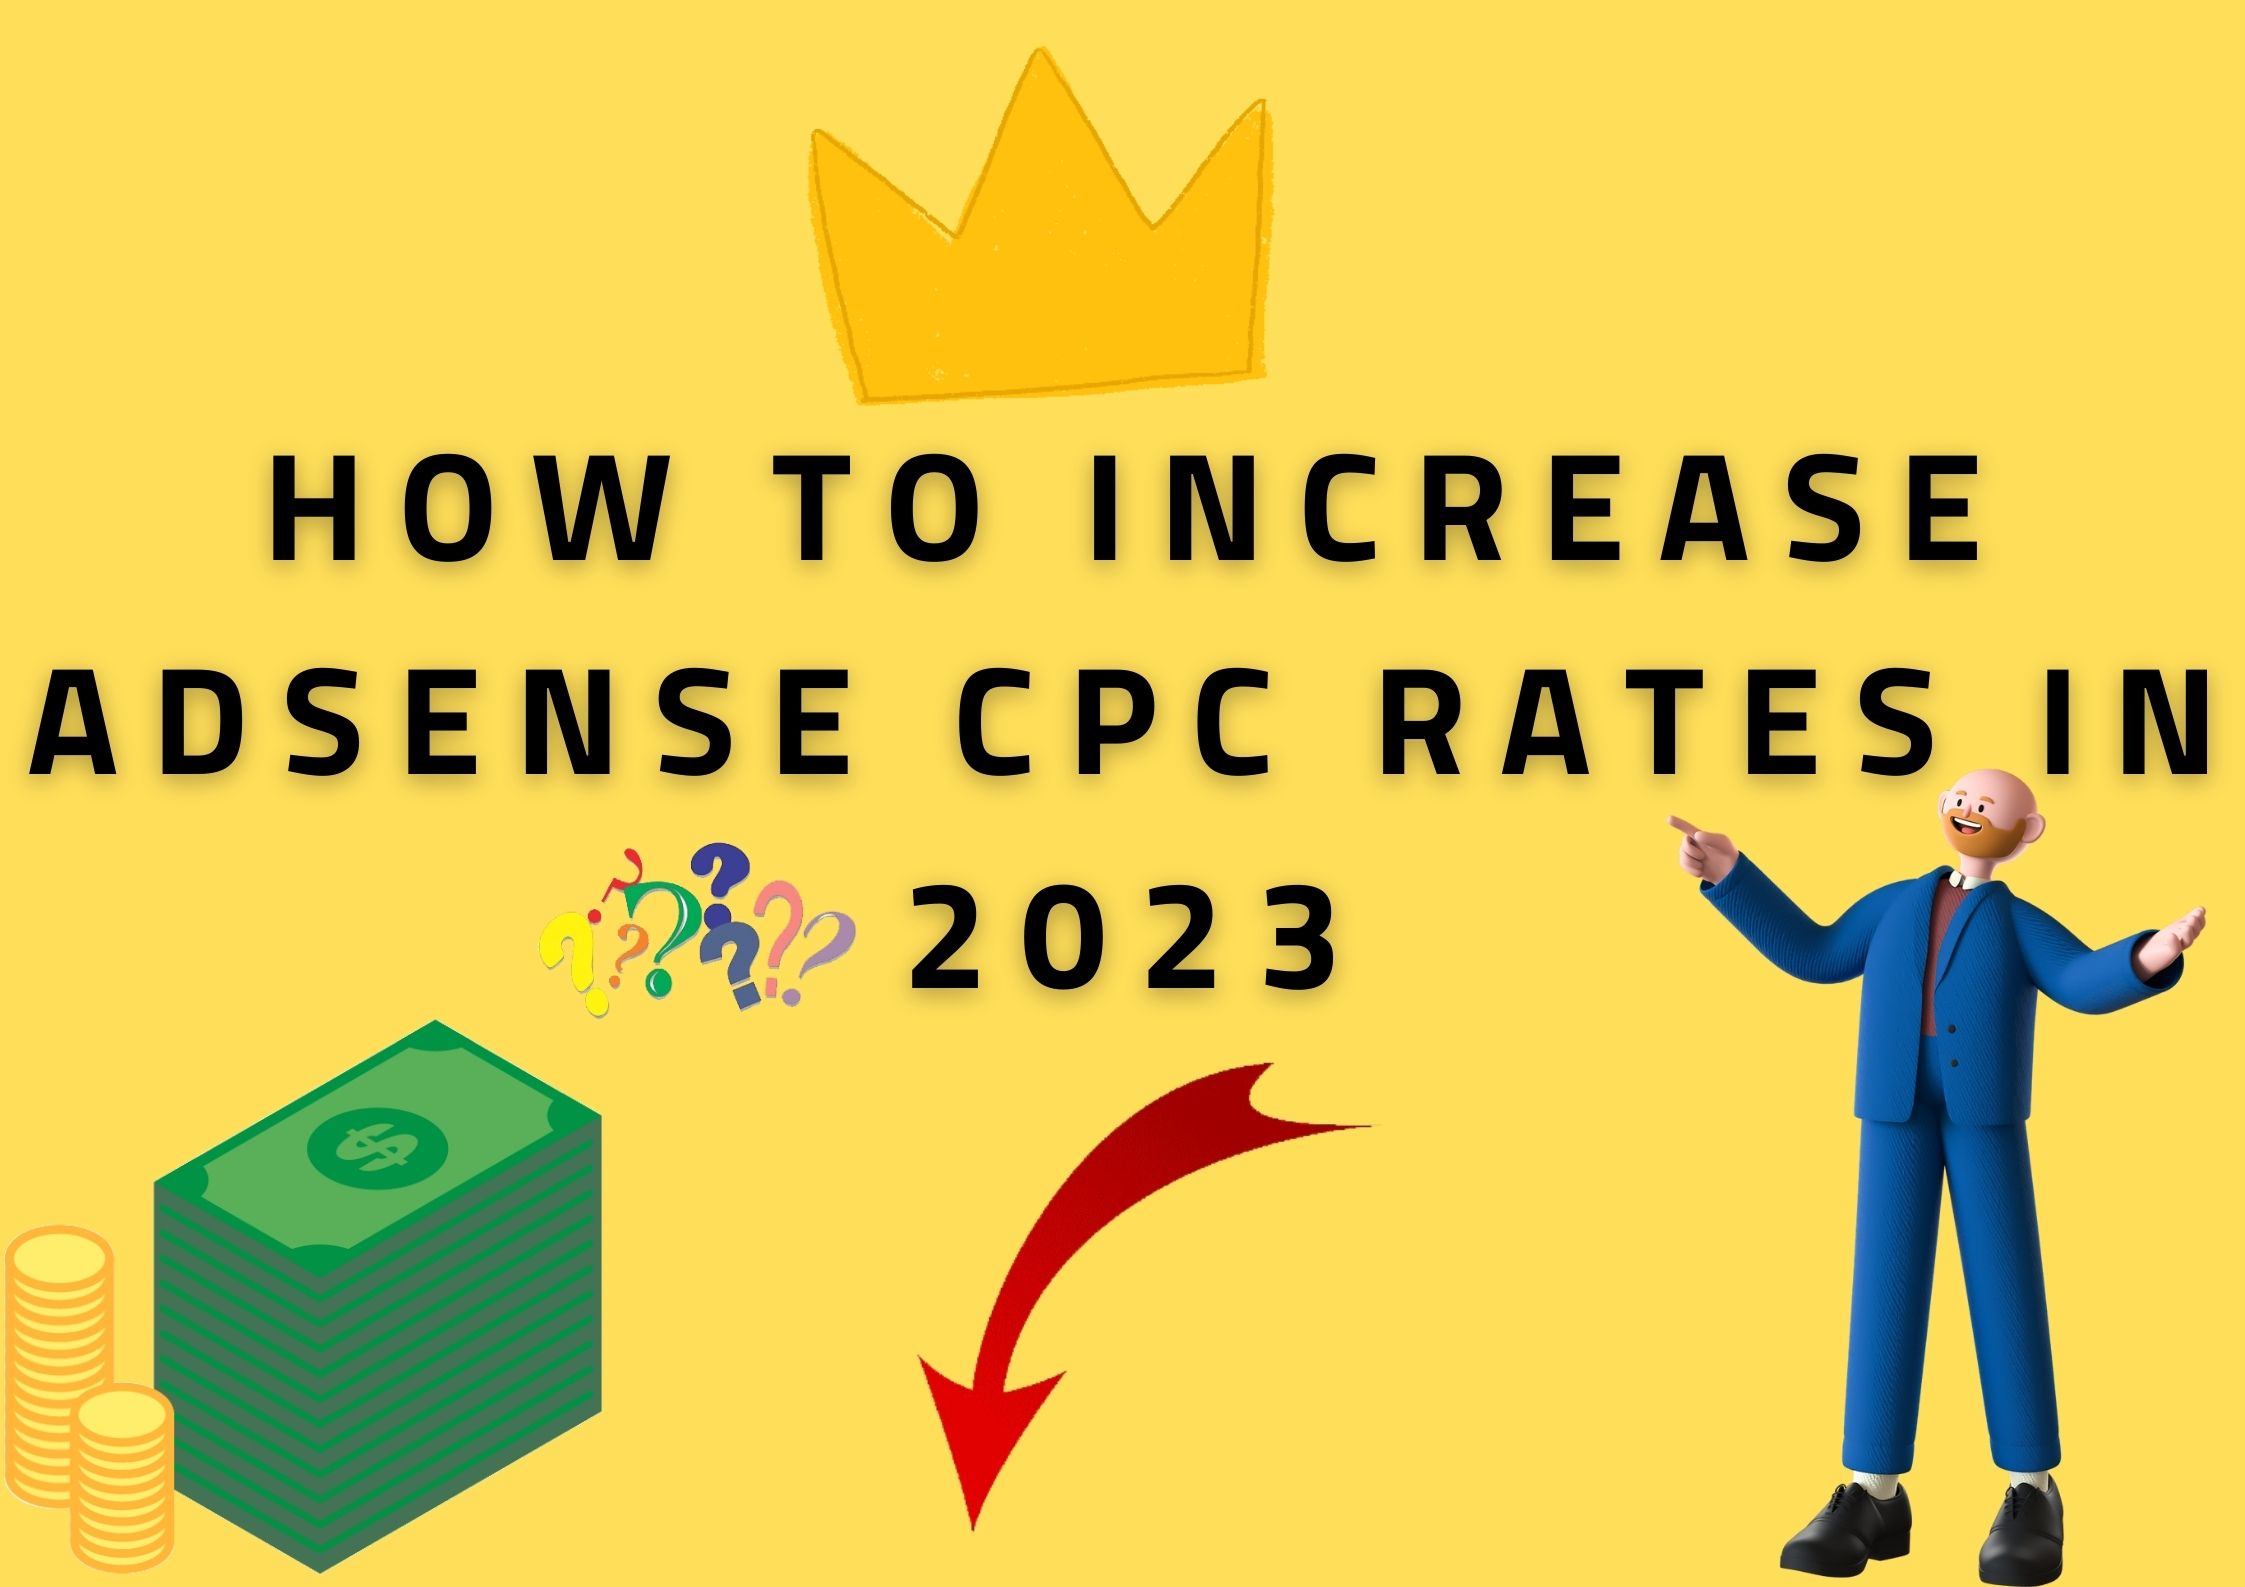 How to Increase Adsense CPC Rates in 2023